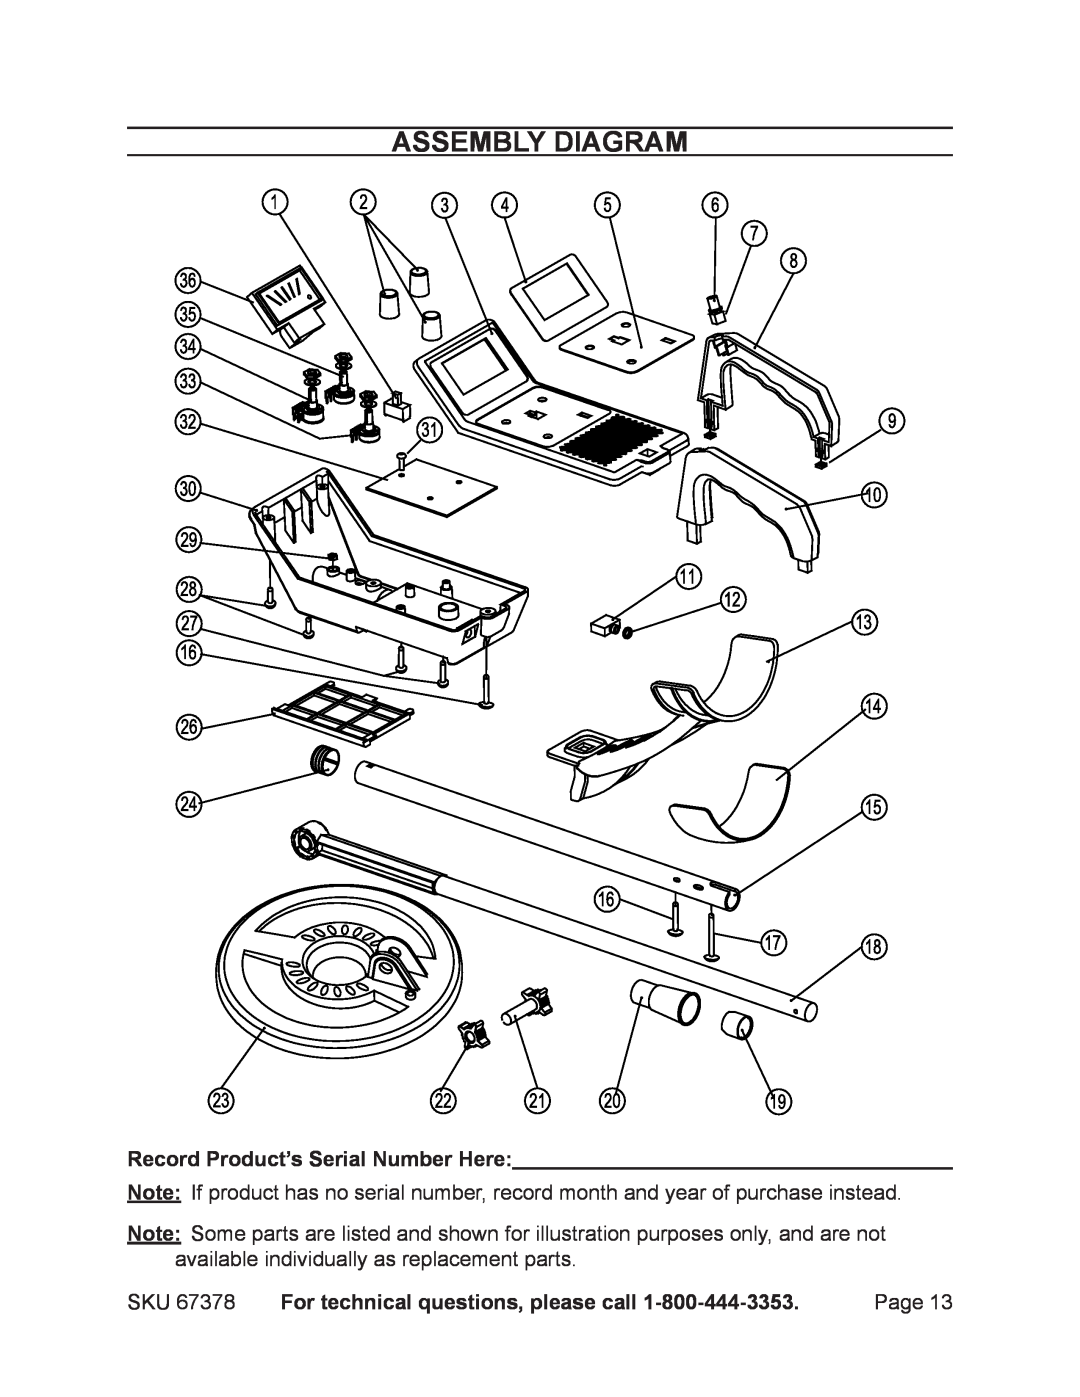 Harbor Freight Tools 67378 Assembly Diagram, Record Product’s Serial Number Here, For technical questions, please call 